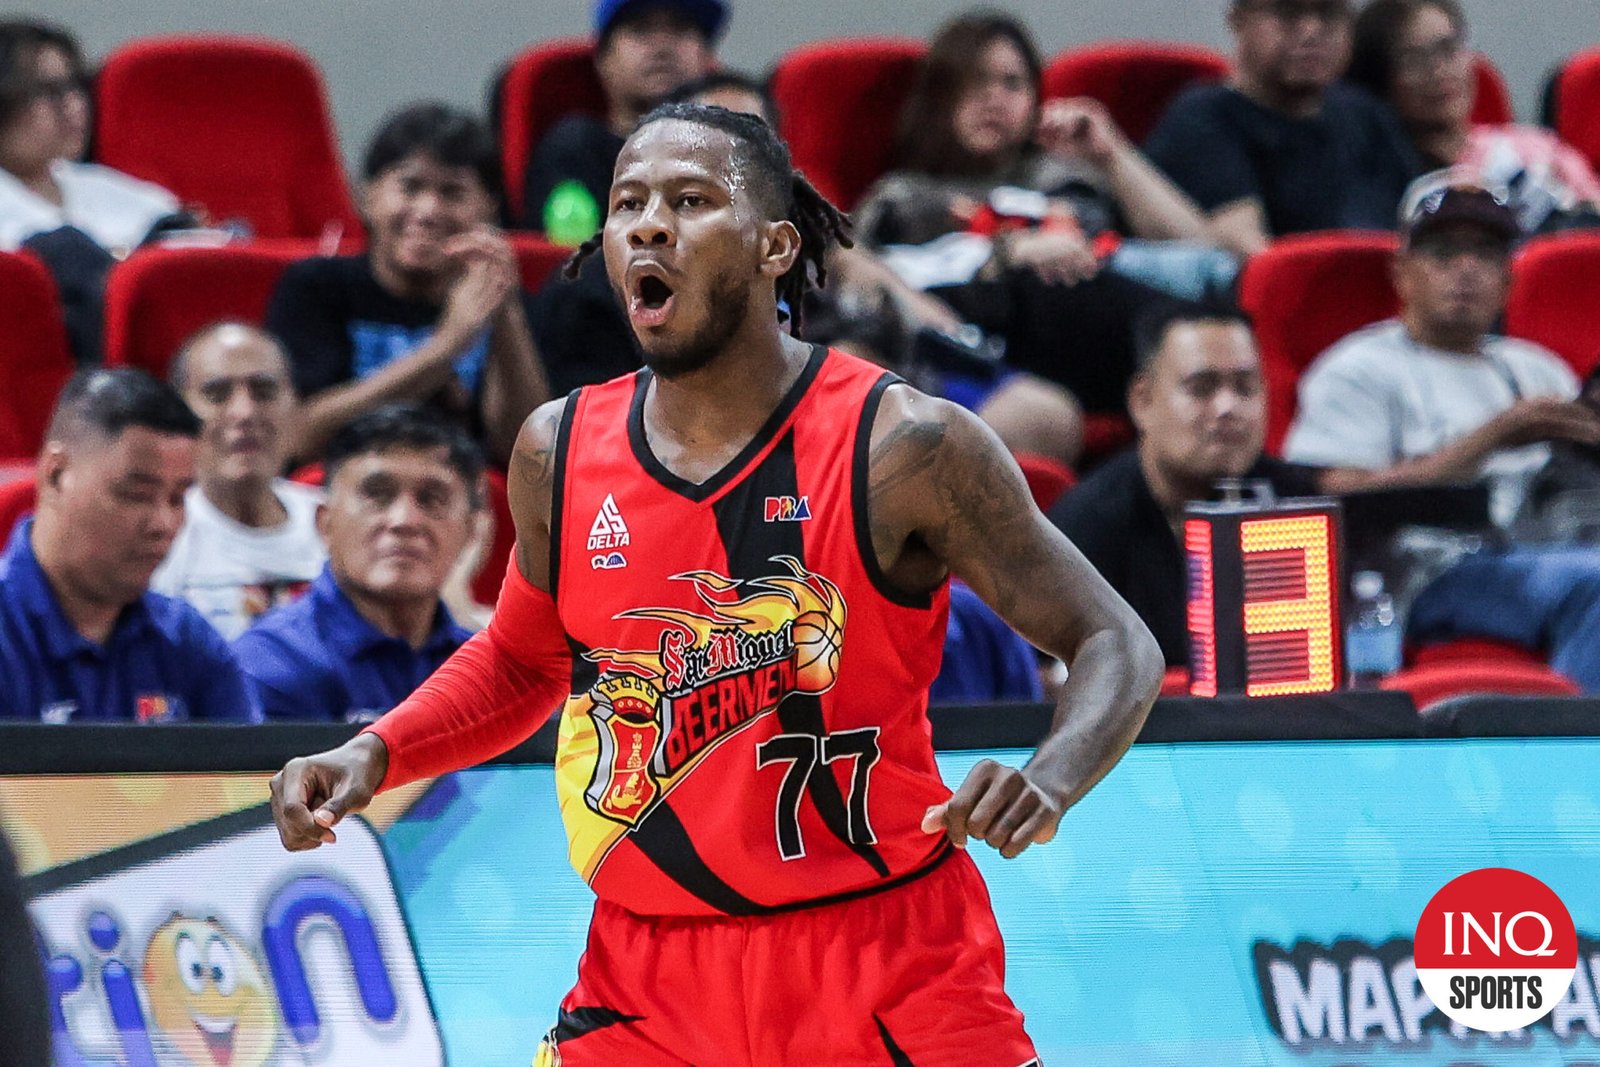 San Miguel Beer clinches top seed, rips NLEX